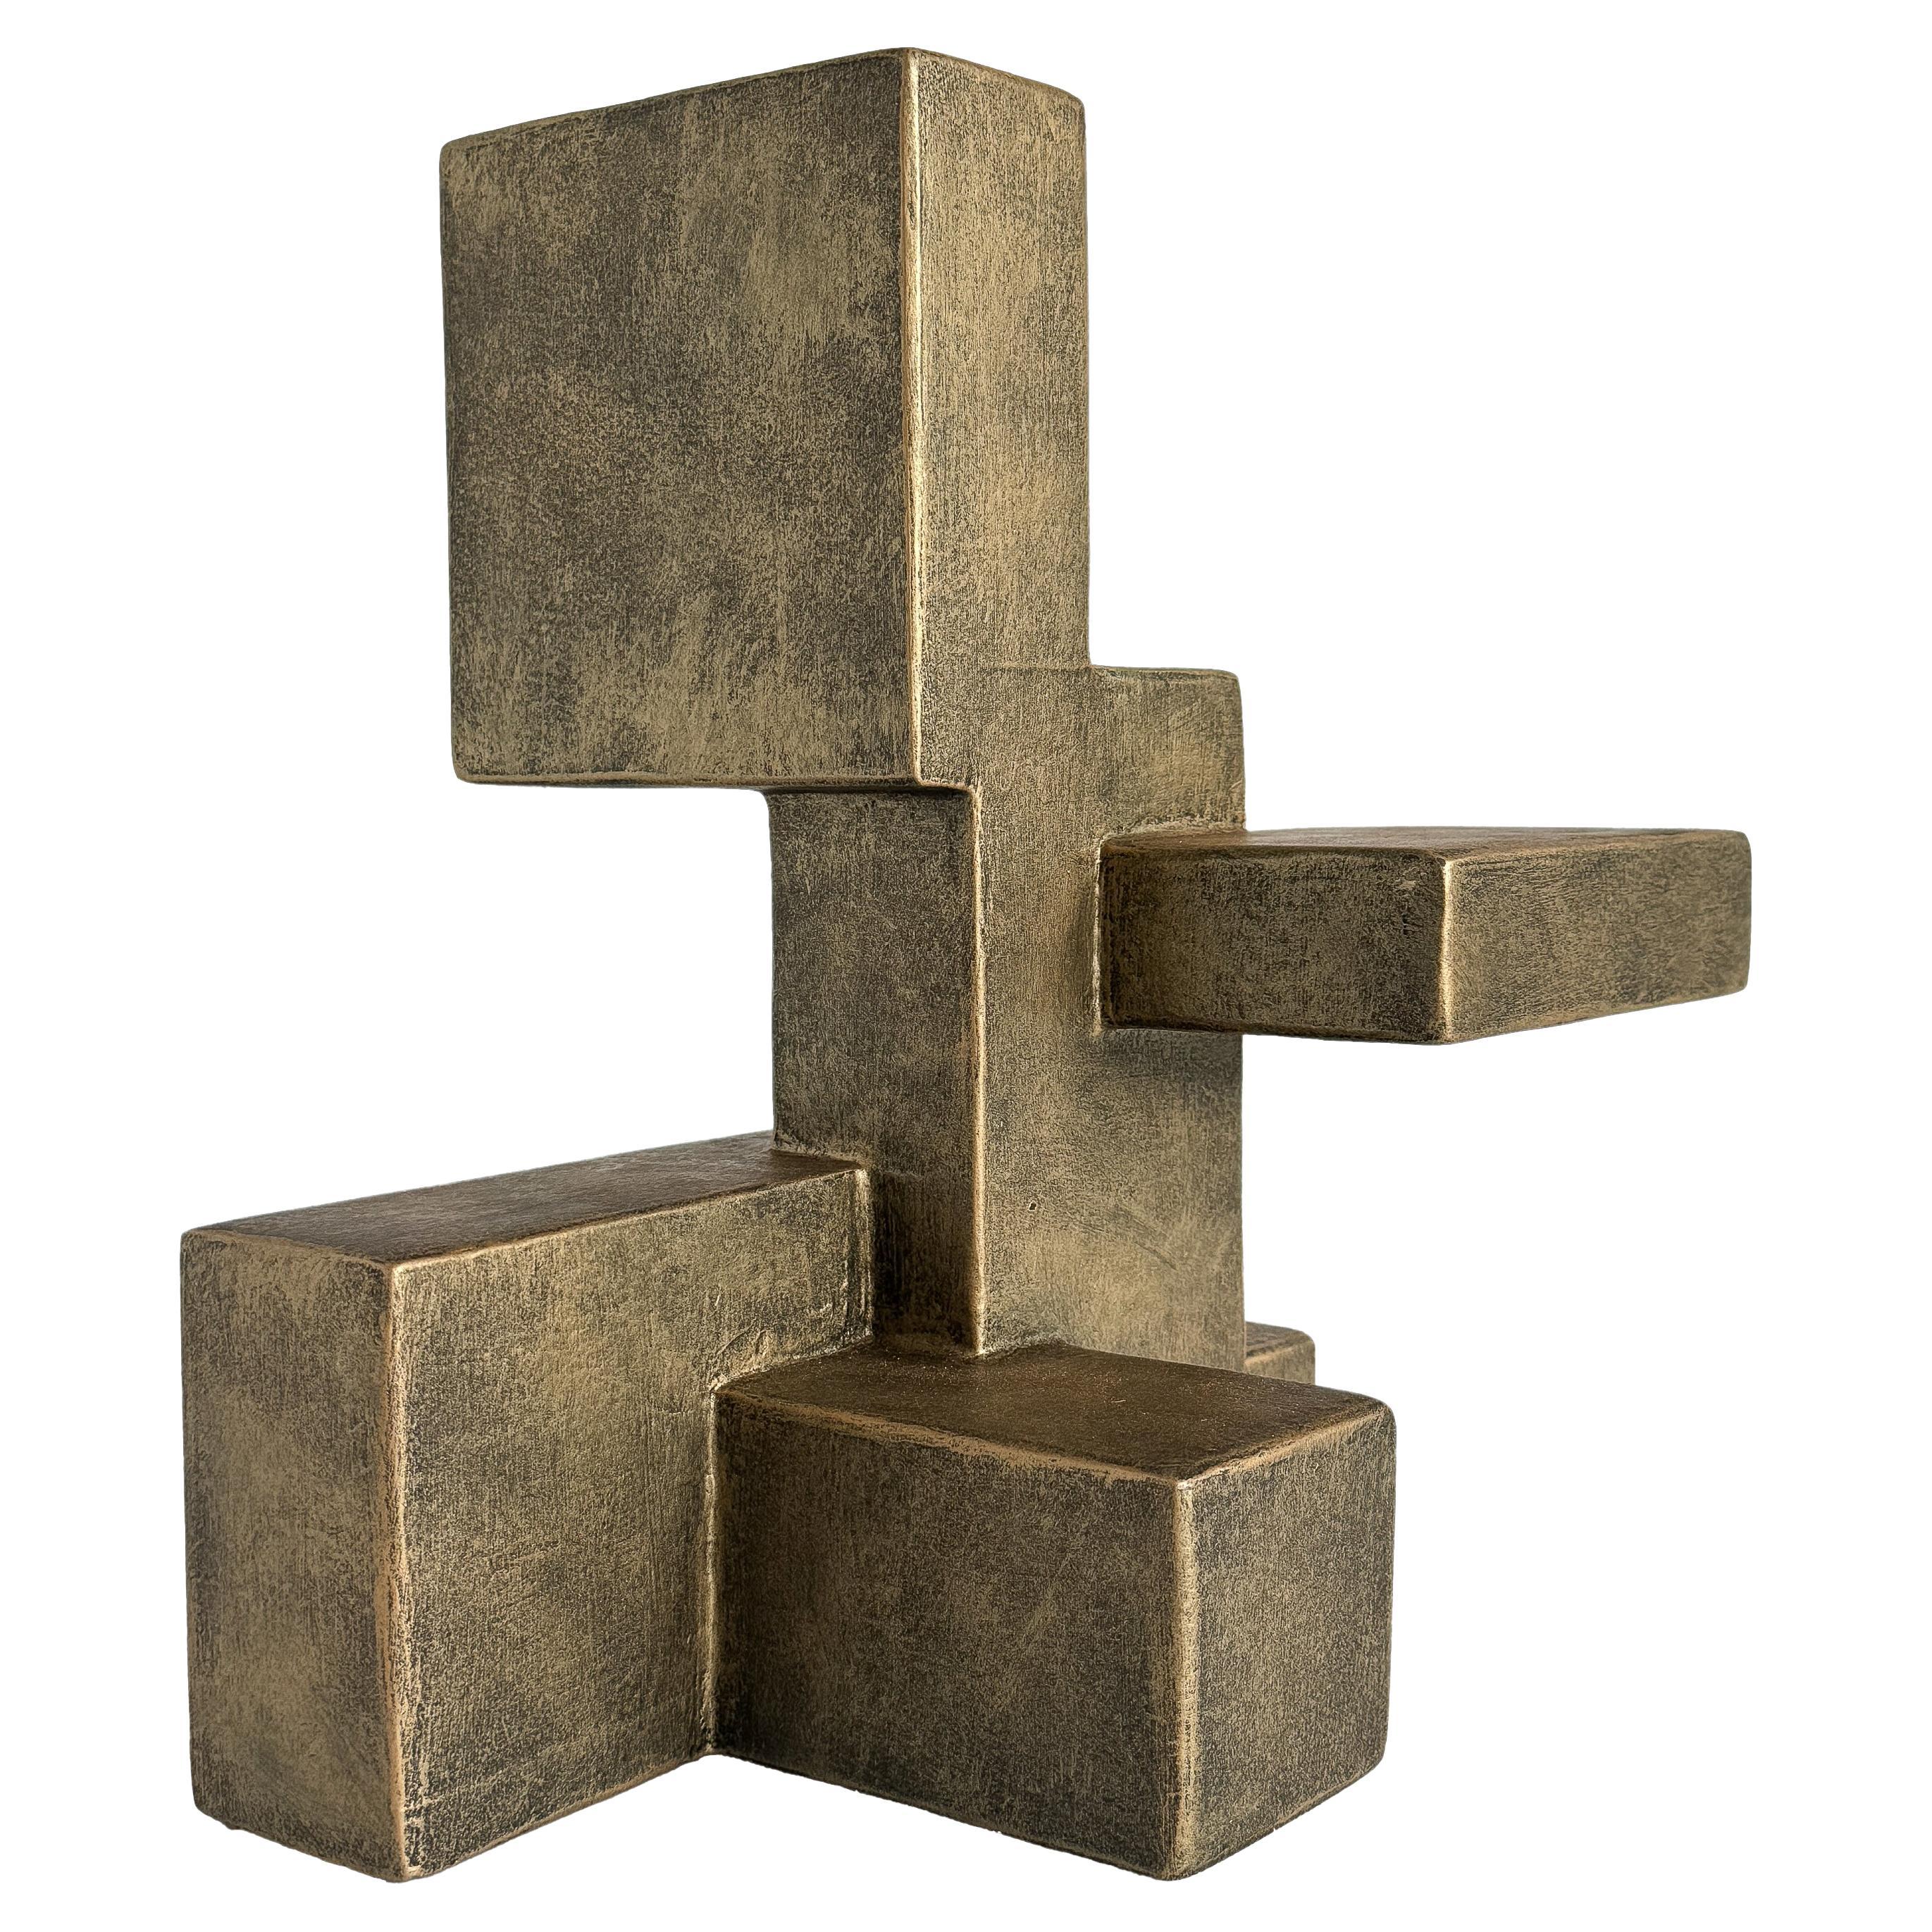 "Composition 202.2" Cubist Abstract Sculpture by Dan Schneiger For Sale